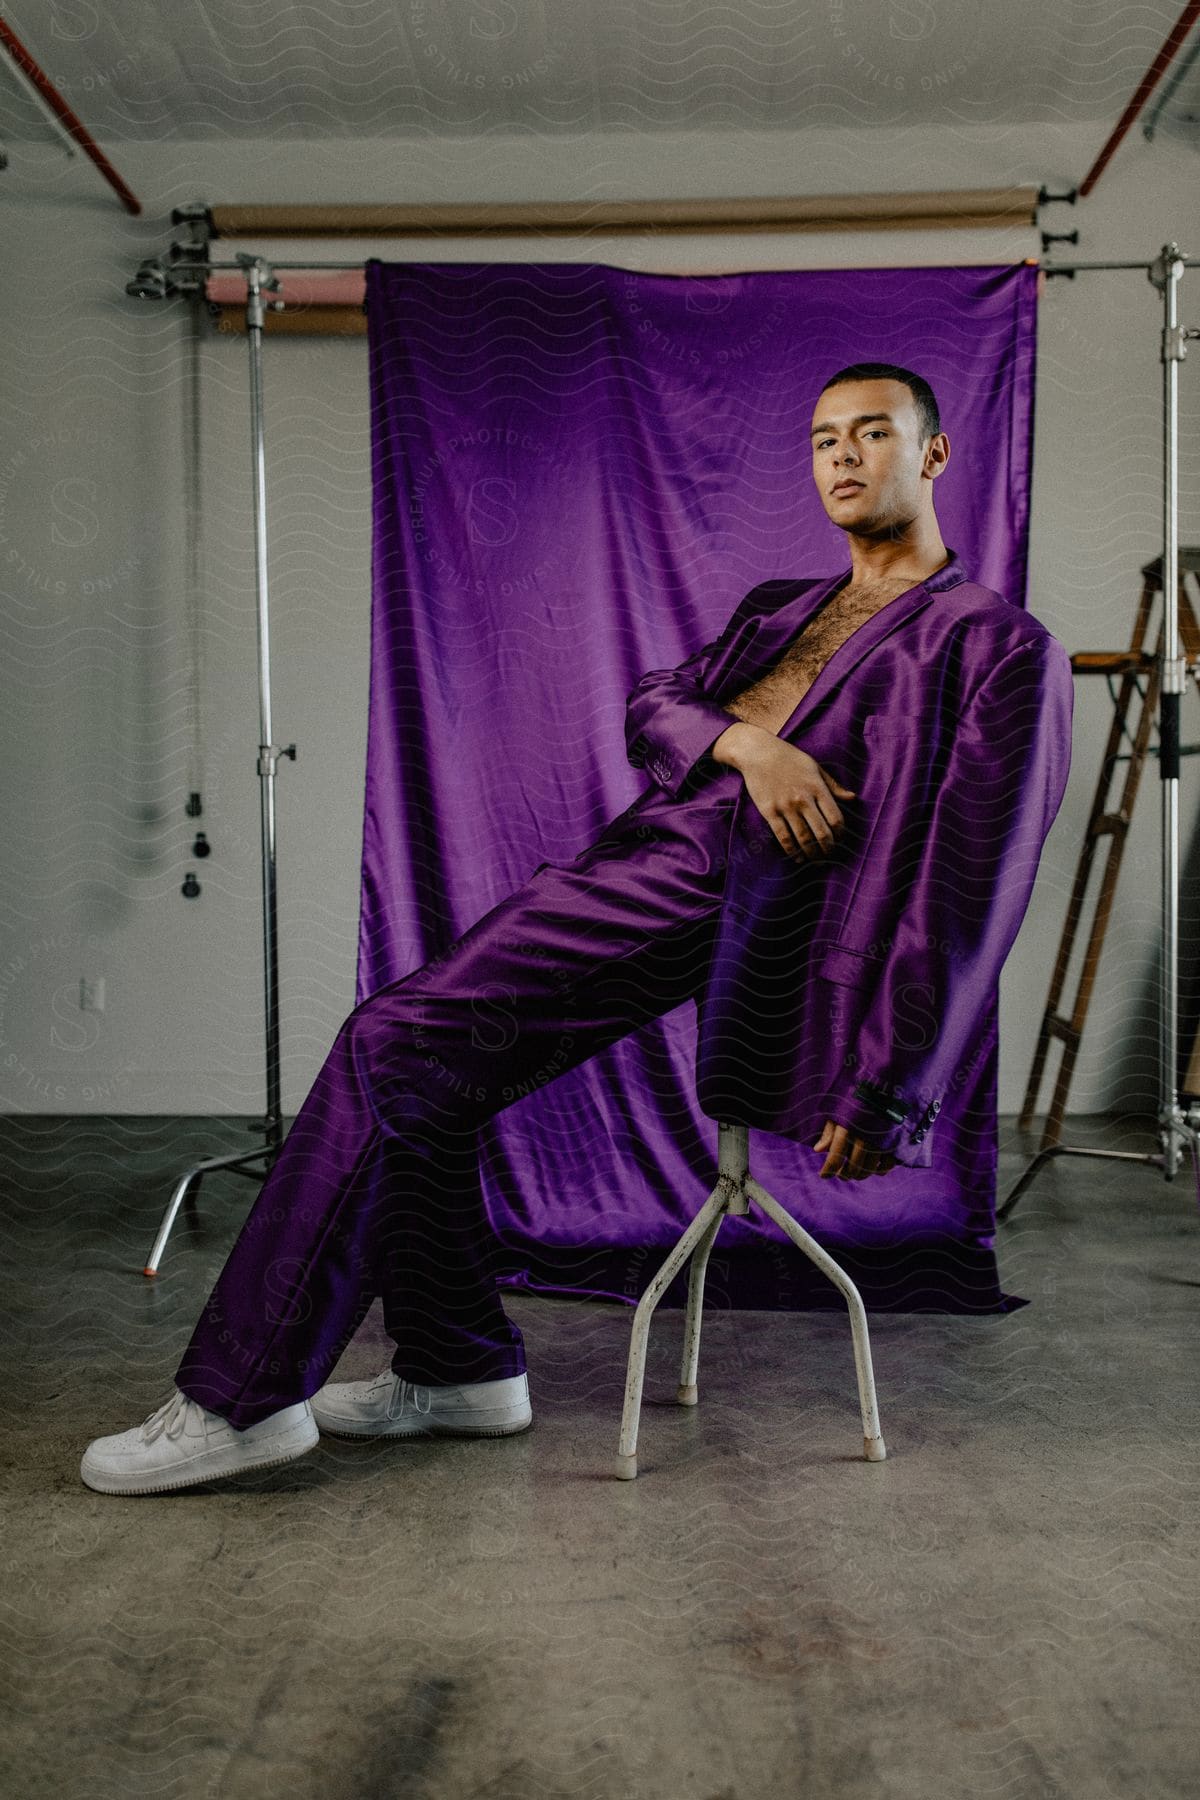 A male model wearing a purple silk suit poses against a stool in an urban environment